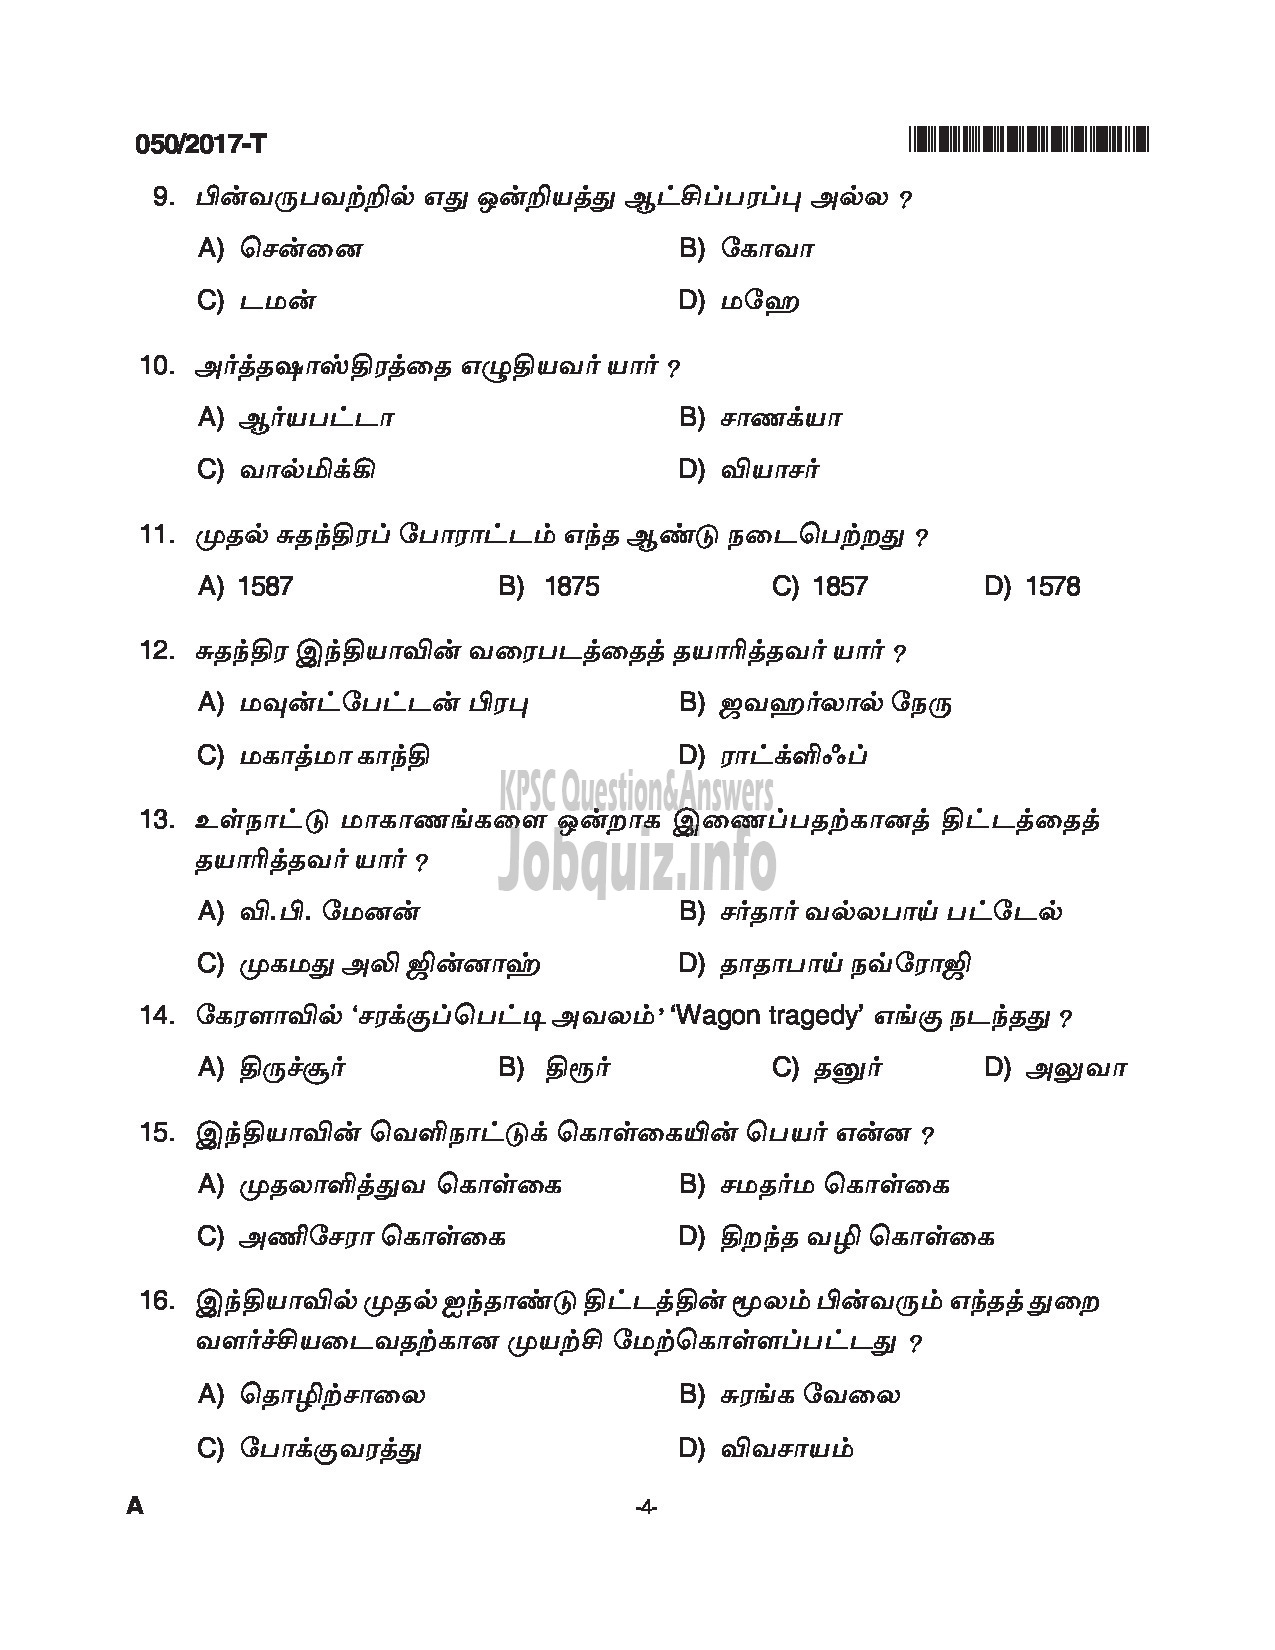 Kerala PSC Question Paper - LDC SR FOR SC/ST, SR FROM DIFFERENTLY ABLED CANDIDATES CAT.NO 122/16, 413/16 QUESTION PAPER(TAMIL)-4